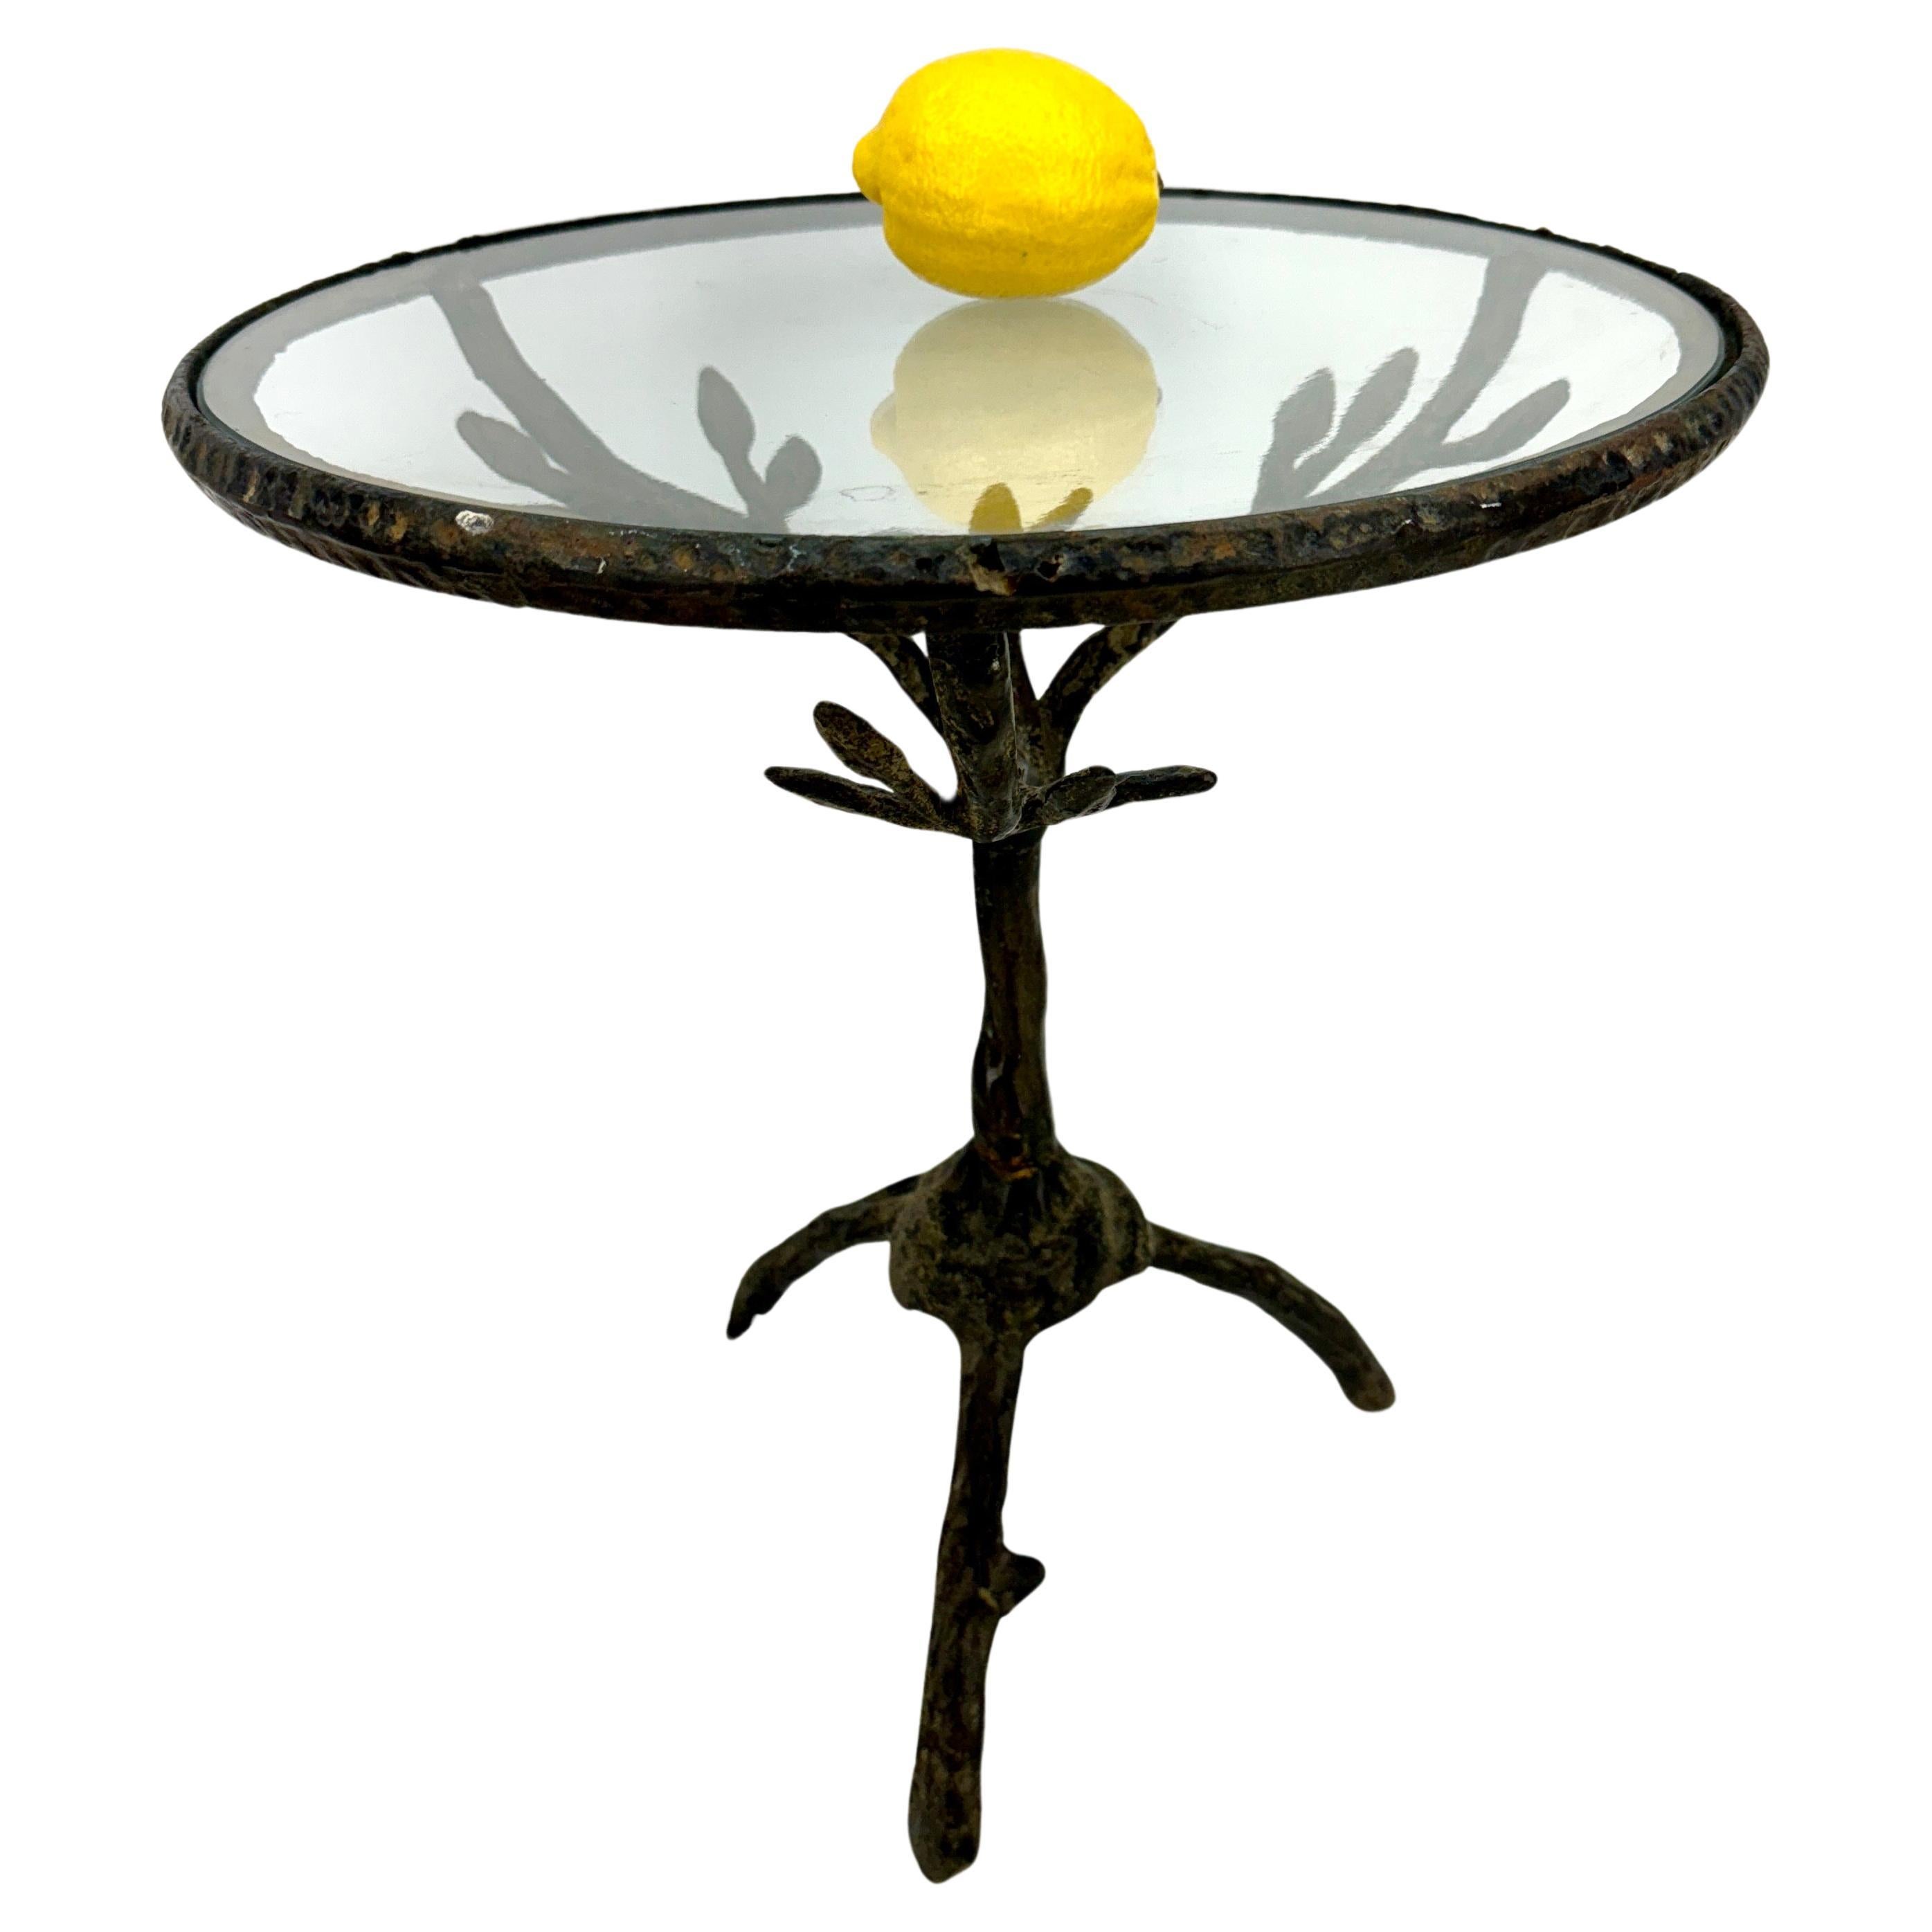  Cast Iron Accent Side Table with Round Glass Top

Unique Mid-Century hand-crafted metal table with branches and bird, perfect used formally or informally. This eye-catching, versatile table will certainly be a conversation piece wherever placed